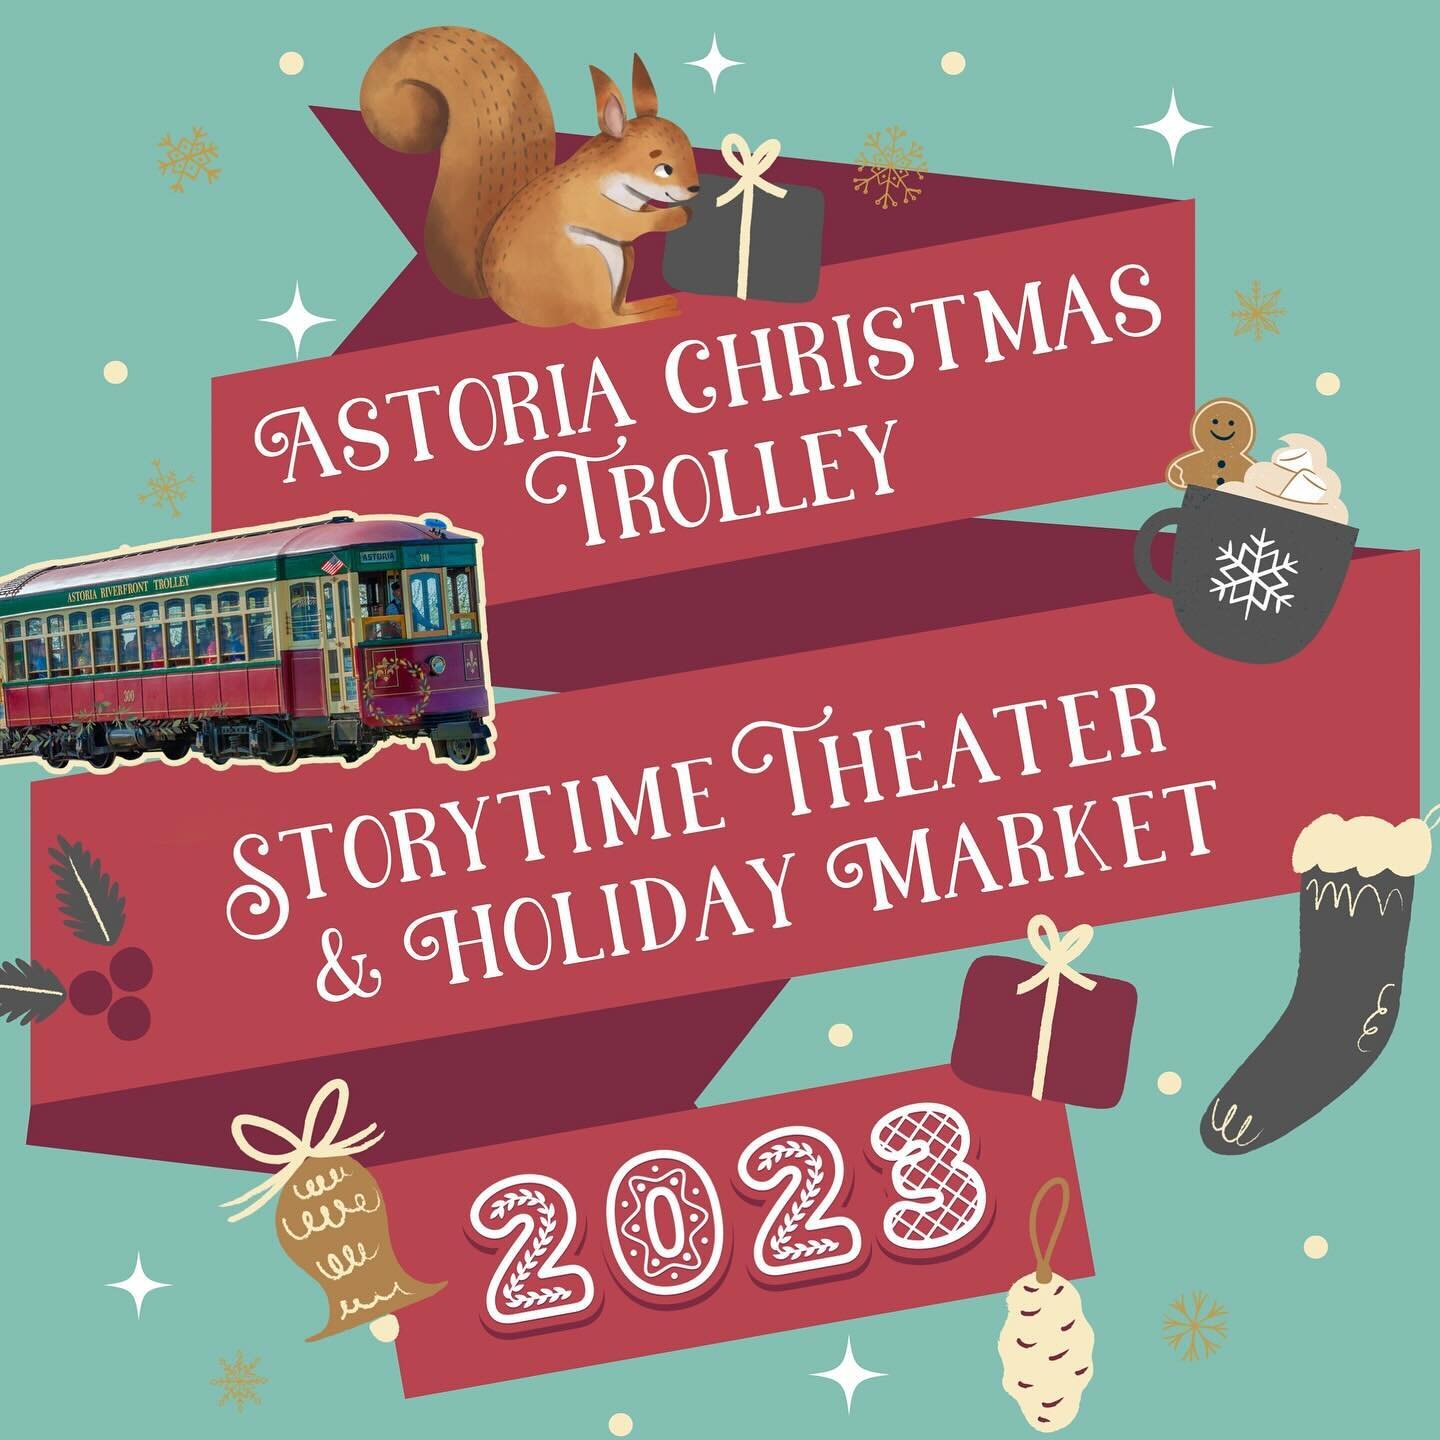 It&rsquo;s been super fun getting to design the website and promo materials for this fun event that runs this weekend in Astoria! Come join the fun and stop by my booth at the Holiday market on Saturday. Lots of new paintings, prints, stickers, cards